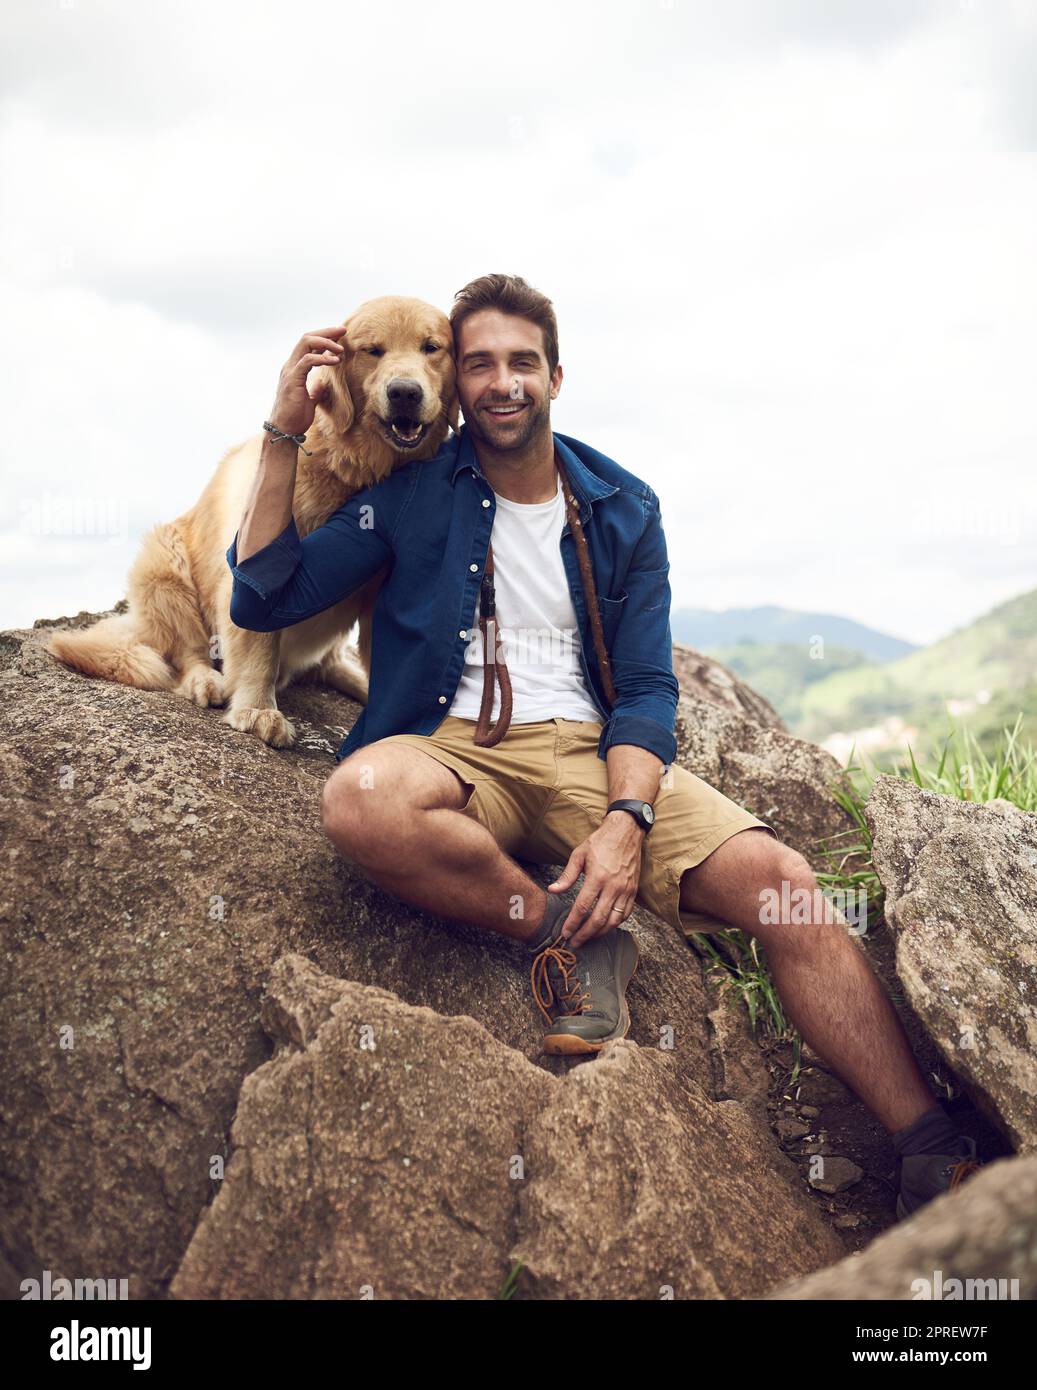 Mans best friend for life. a handsome young man sitting on a rock with his golden retriever after a day out hiking. Stock Photo